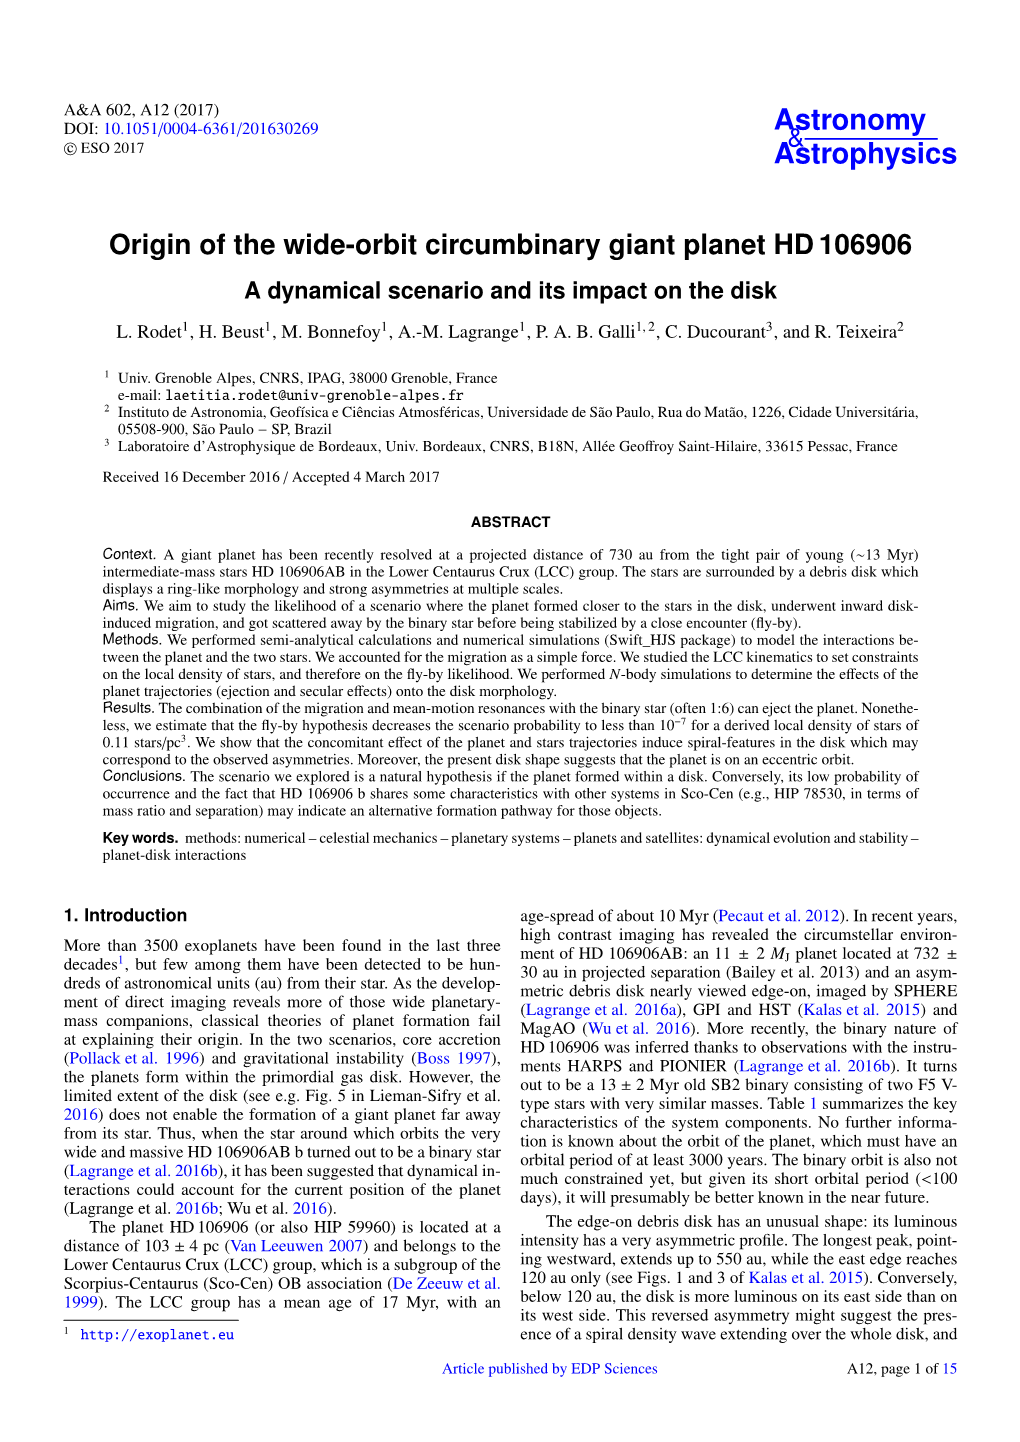 Origin of the Wide-Orbit Circumbinary Giant Planet HD 106906 a Dynamical Scenario and Its Impact on the Disk